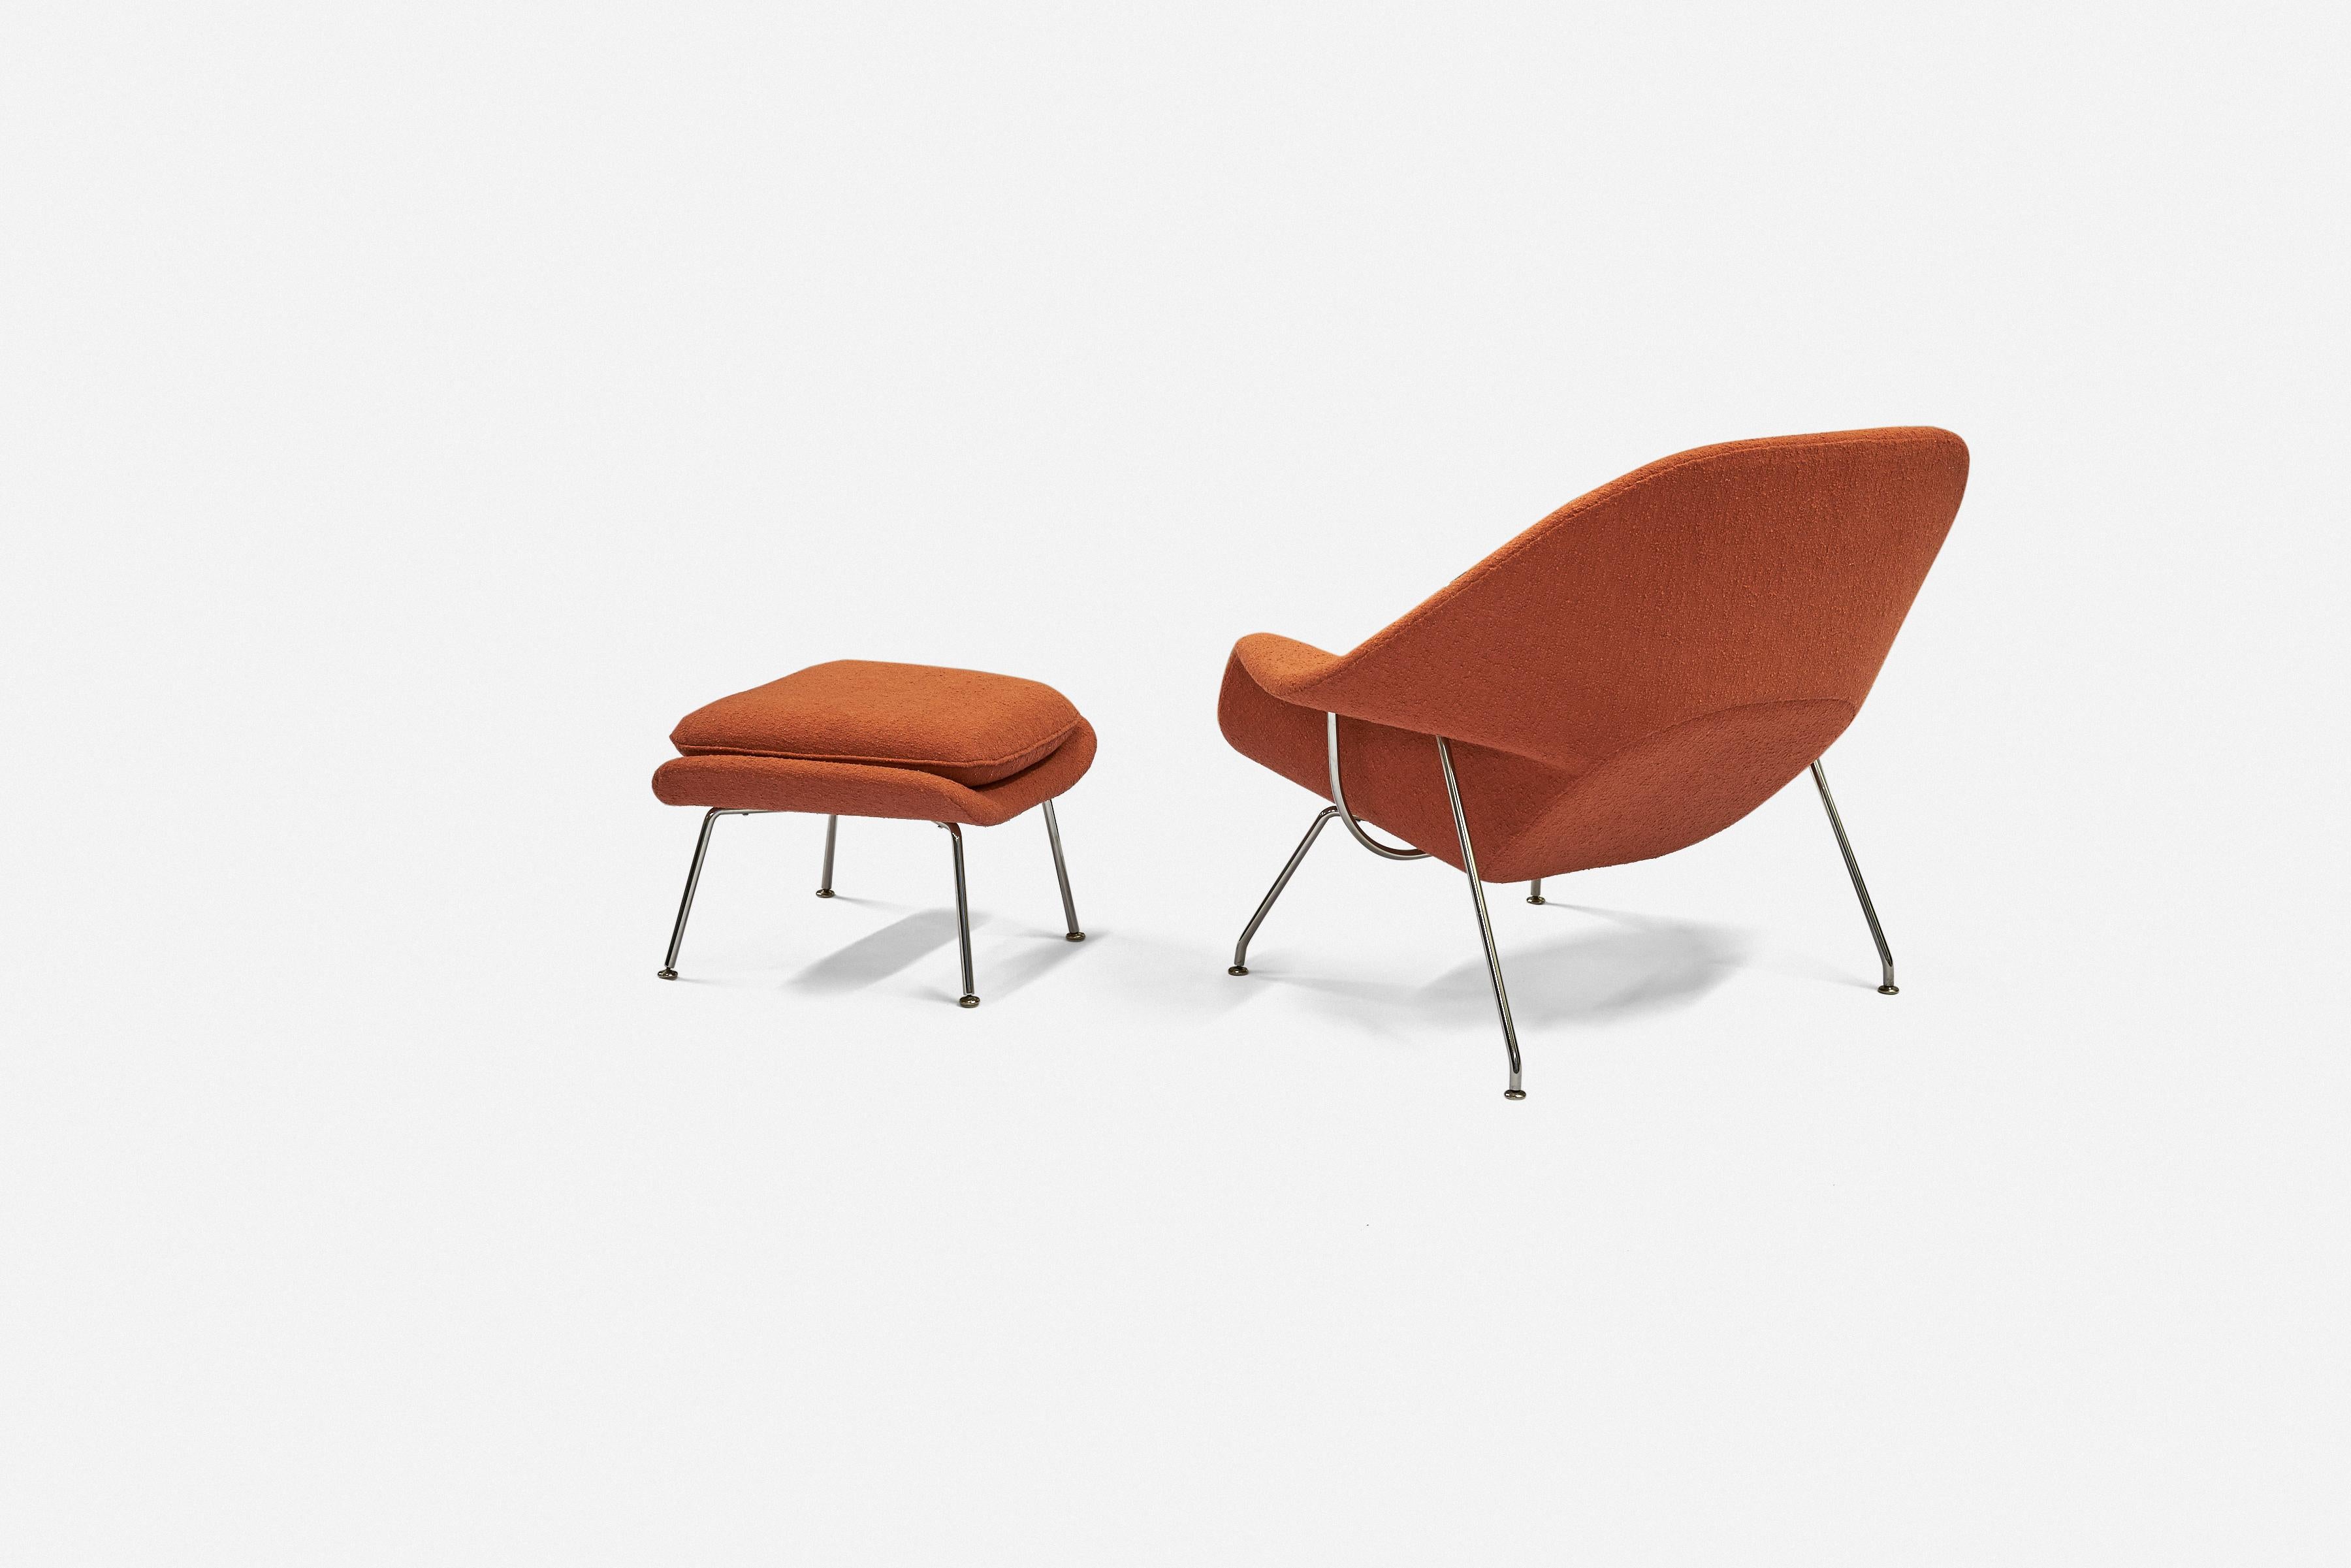 Plated Eero Saarinen vintage Womb Chair and Ottoman for Knoll